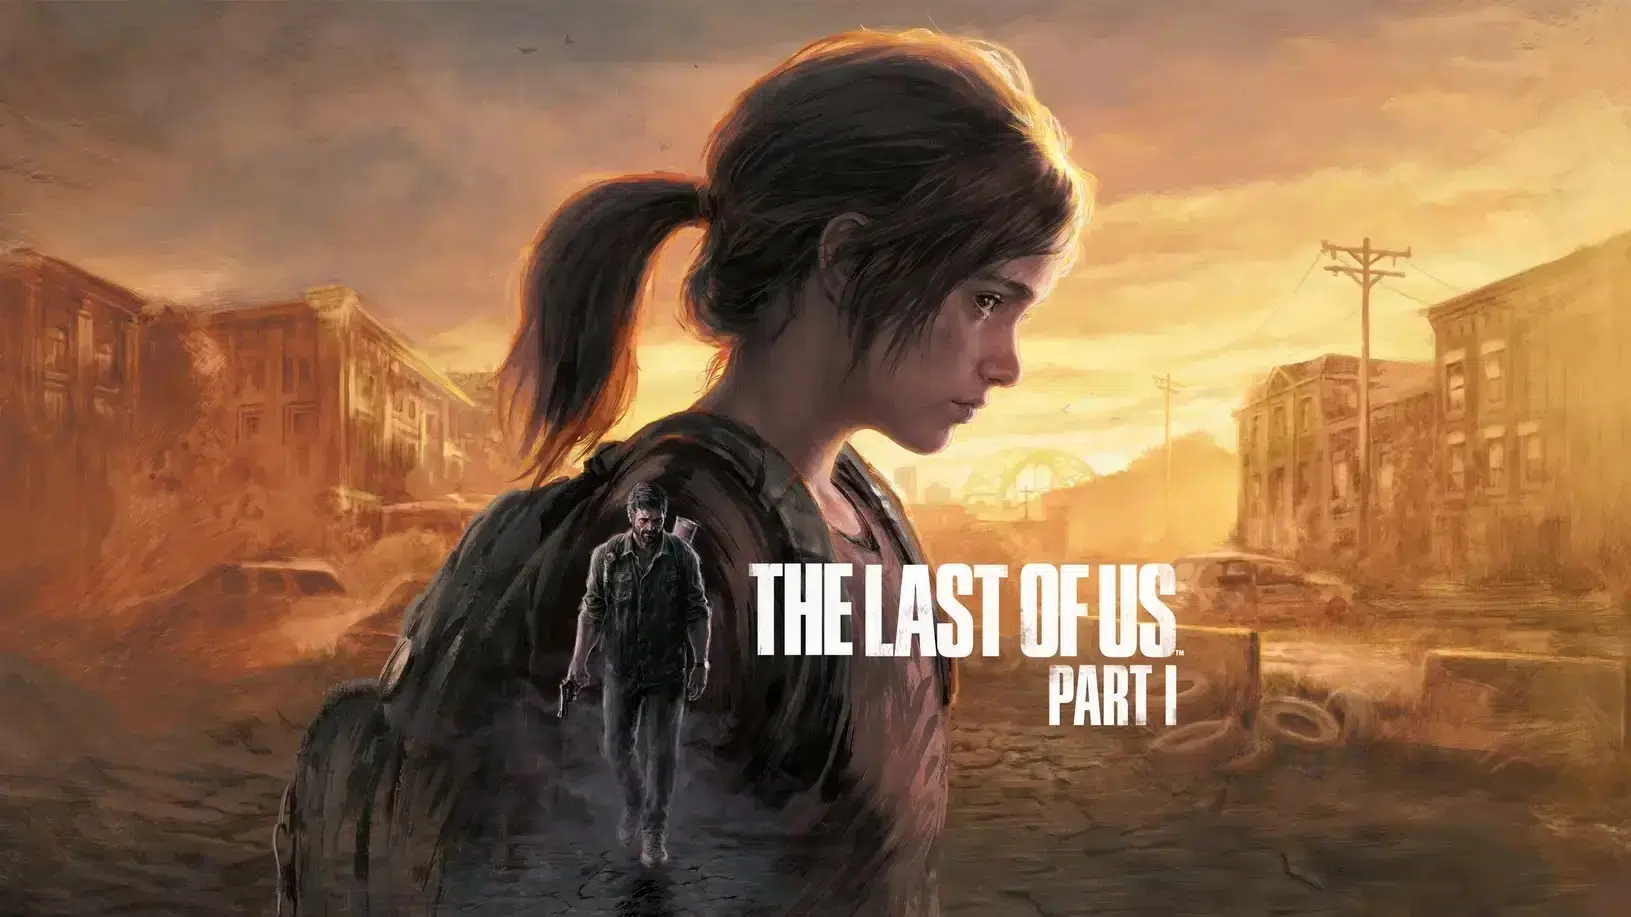 The Last of Us Part 1 artwork